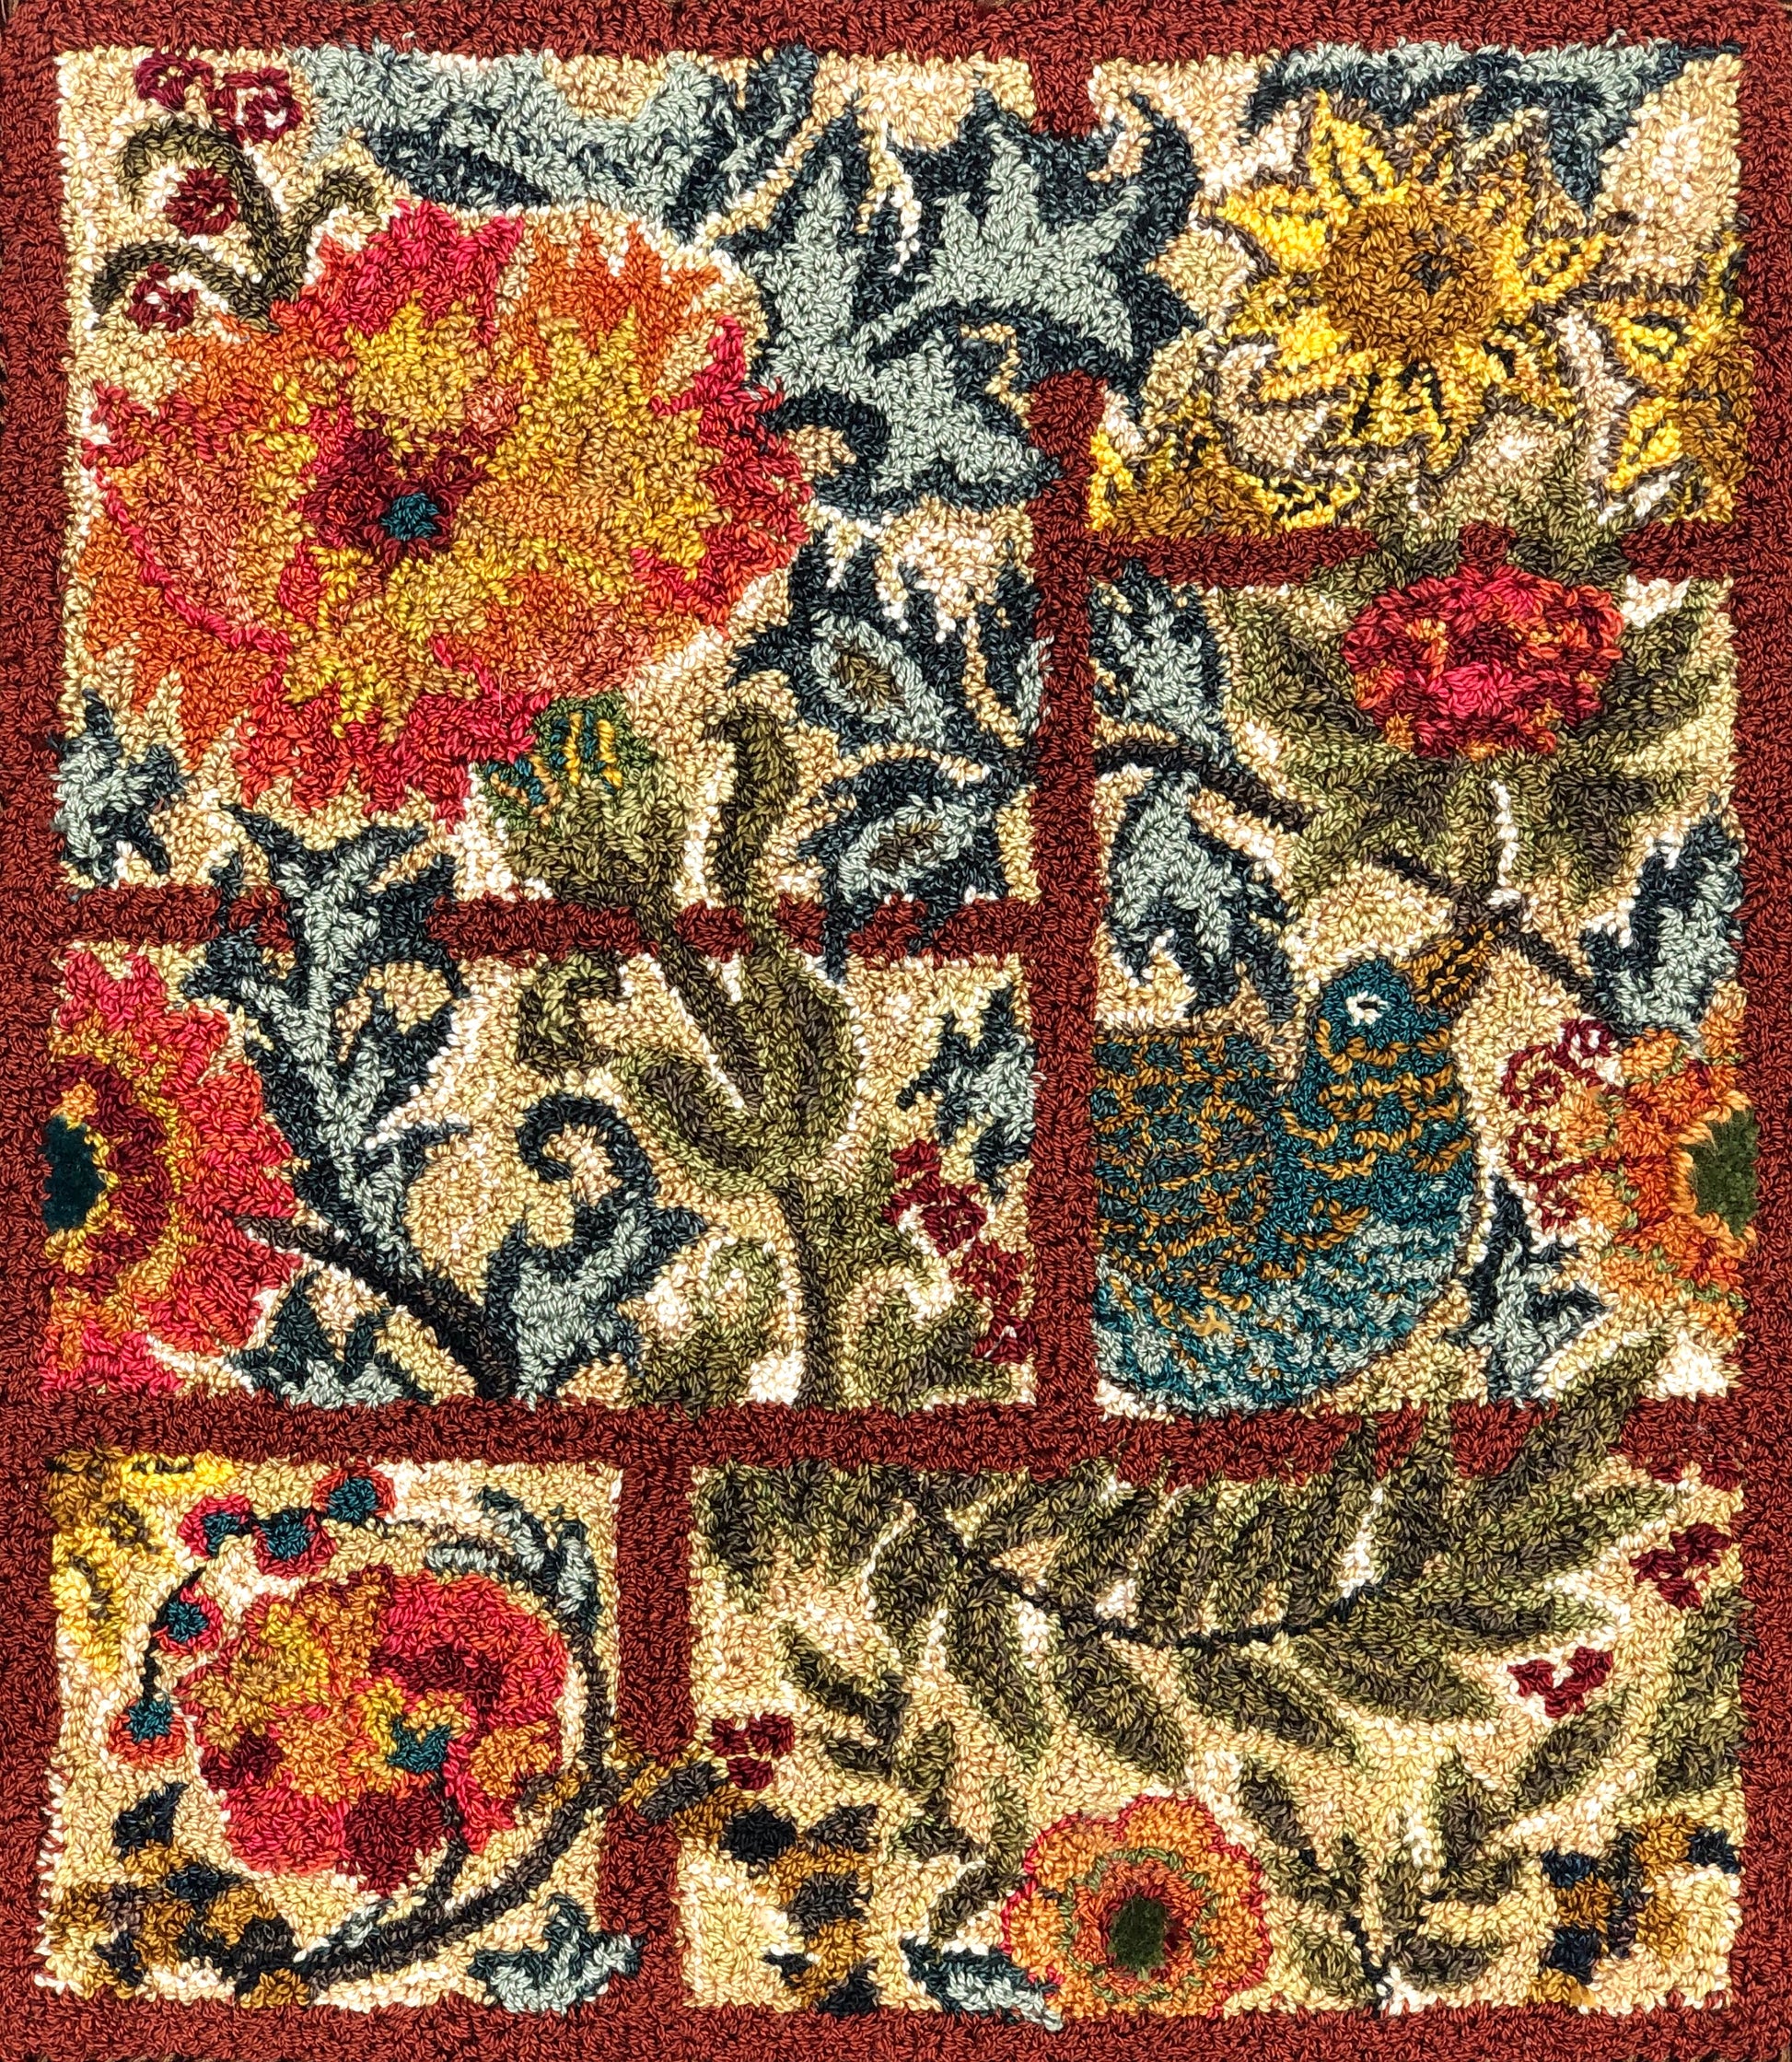 Views of Morris- Punch Needle Patten with Thread Kit by Orphaned Wool. Available as a Paper or Cloth Pattern Copyright Kelly Kanyok  2020